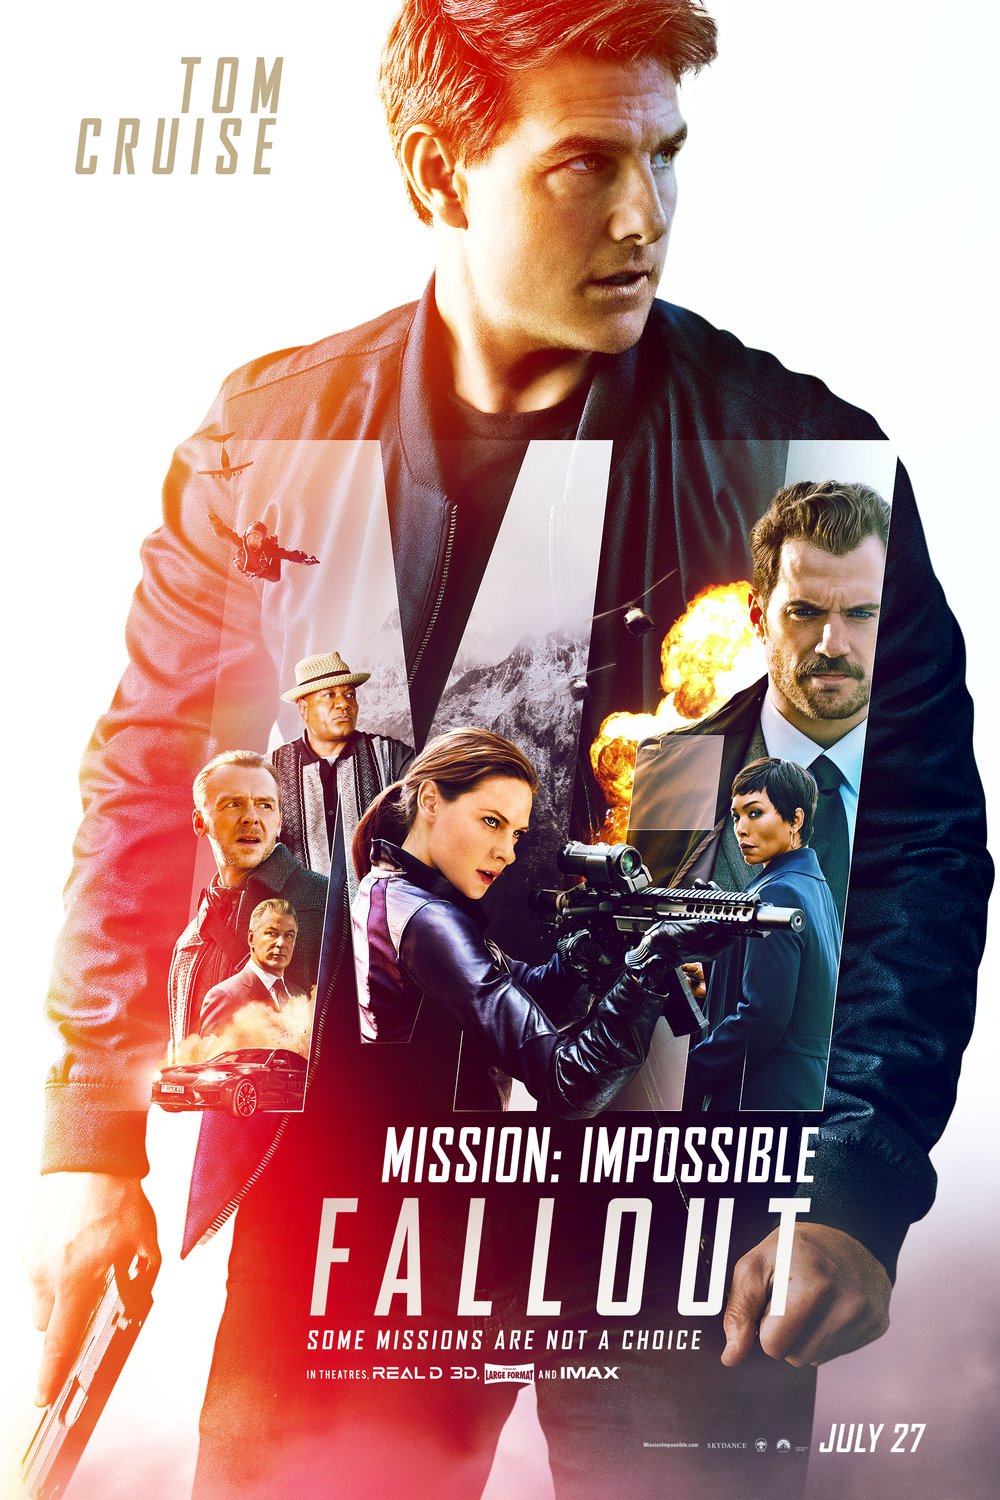 Poster of the movie Mission: Impossible - Fallout